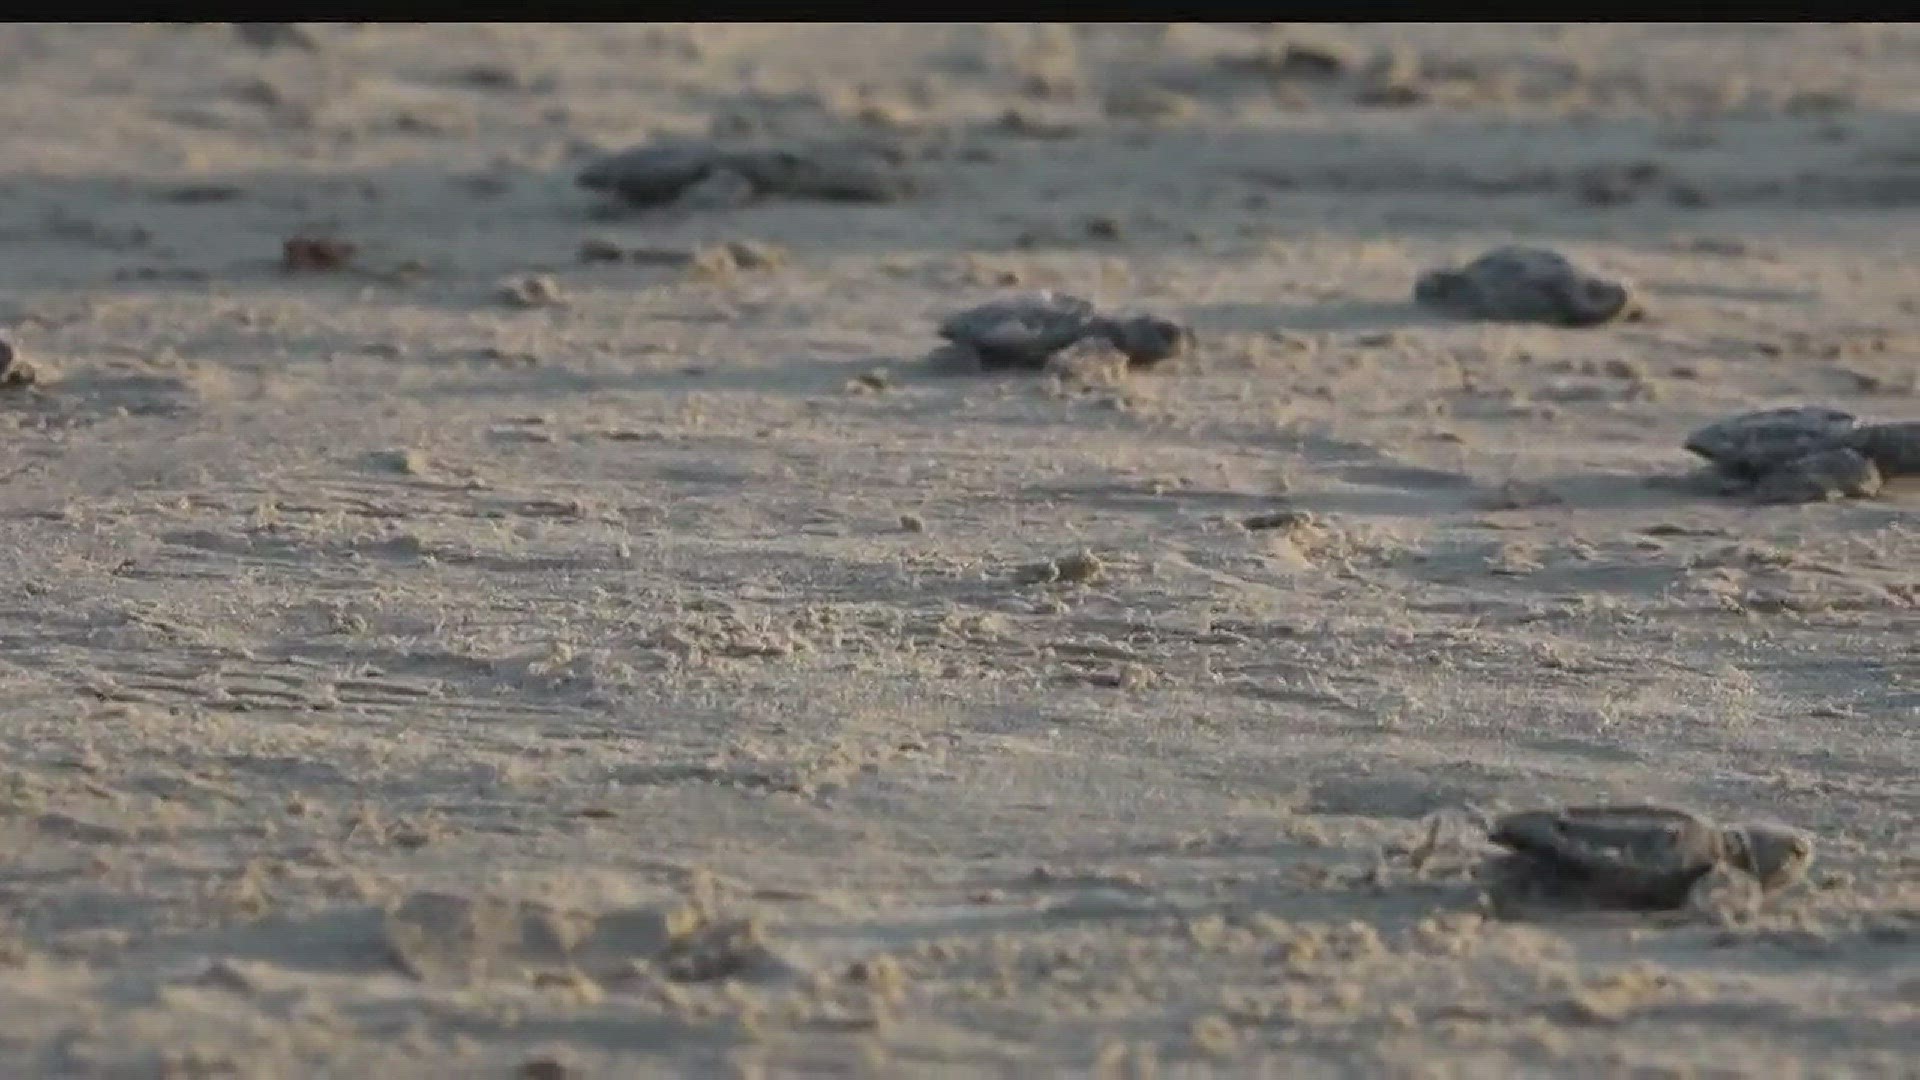 The Kemp's Ridley sea turtle is an endangered population, but on Wednesday there were some new beginning for a group of hatchlings that were released into open water at the Padre Island National Seashore.